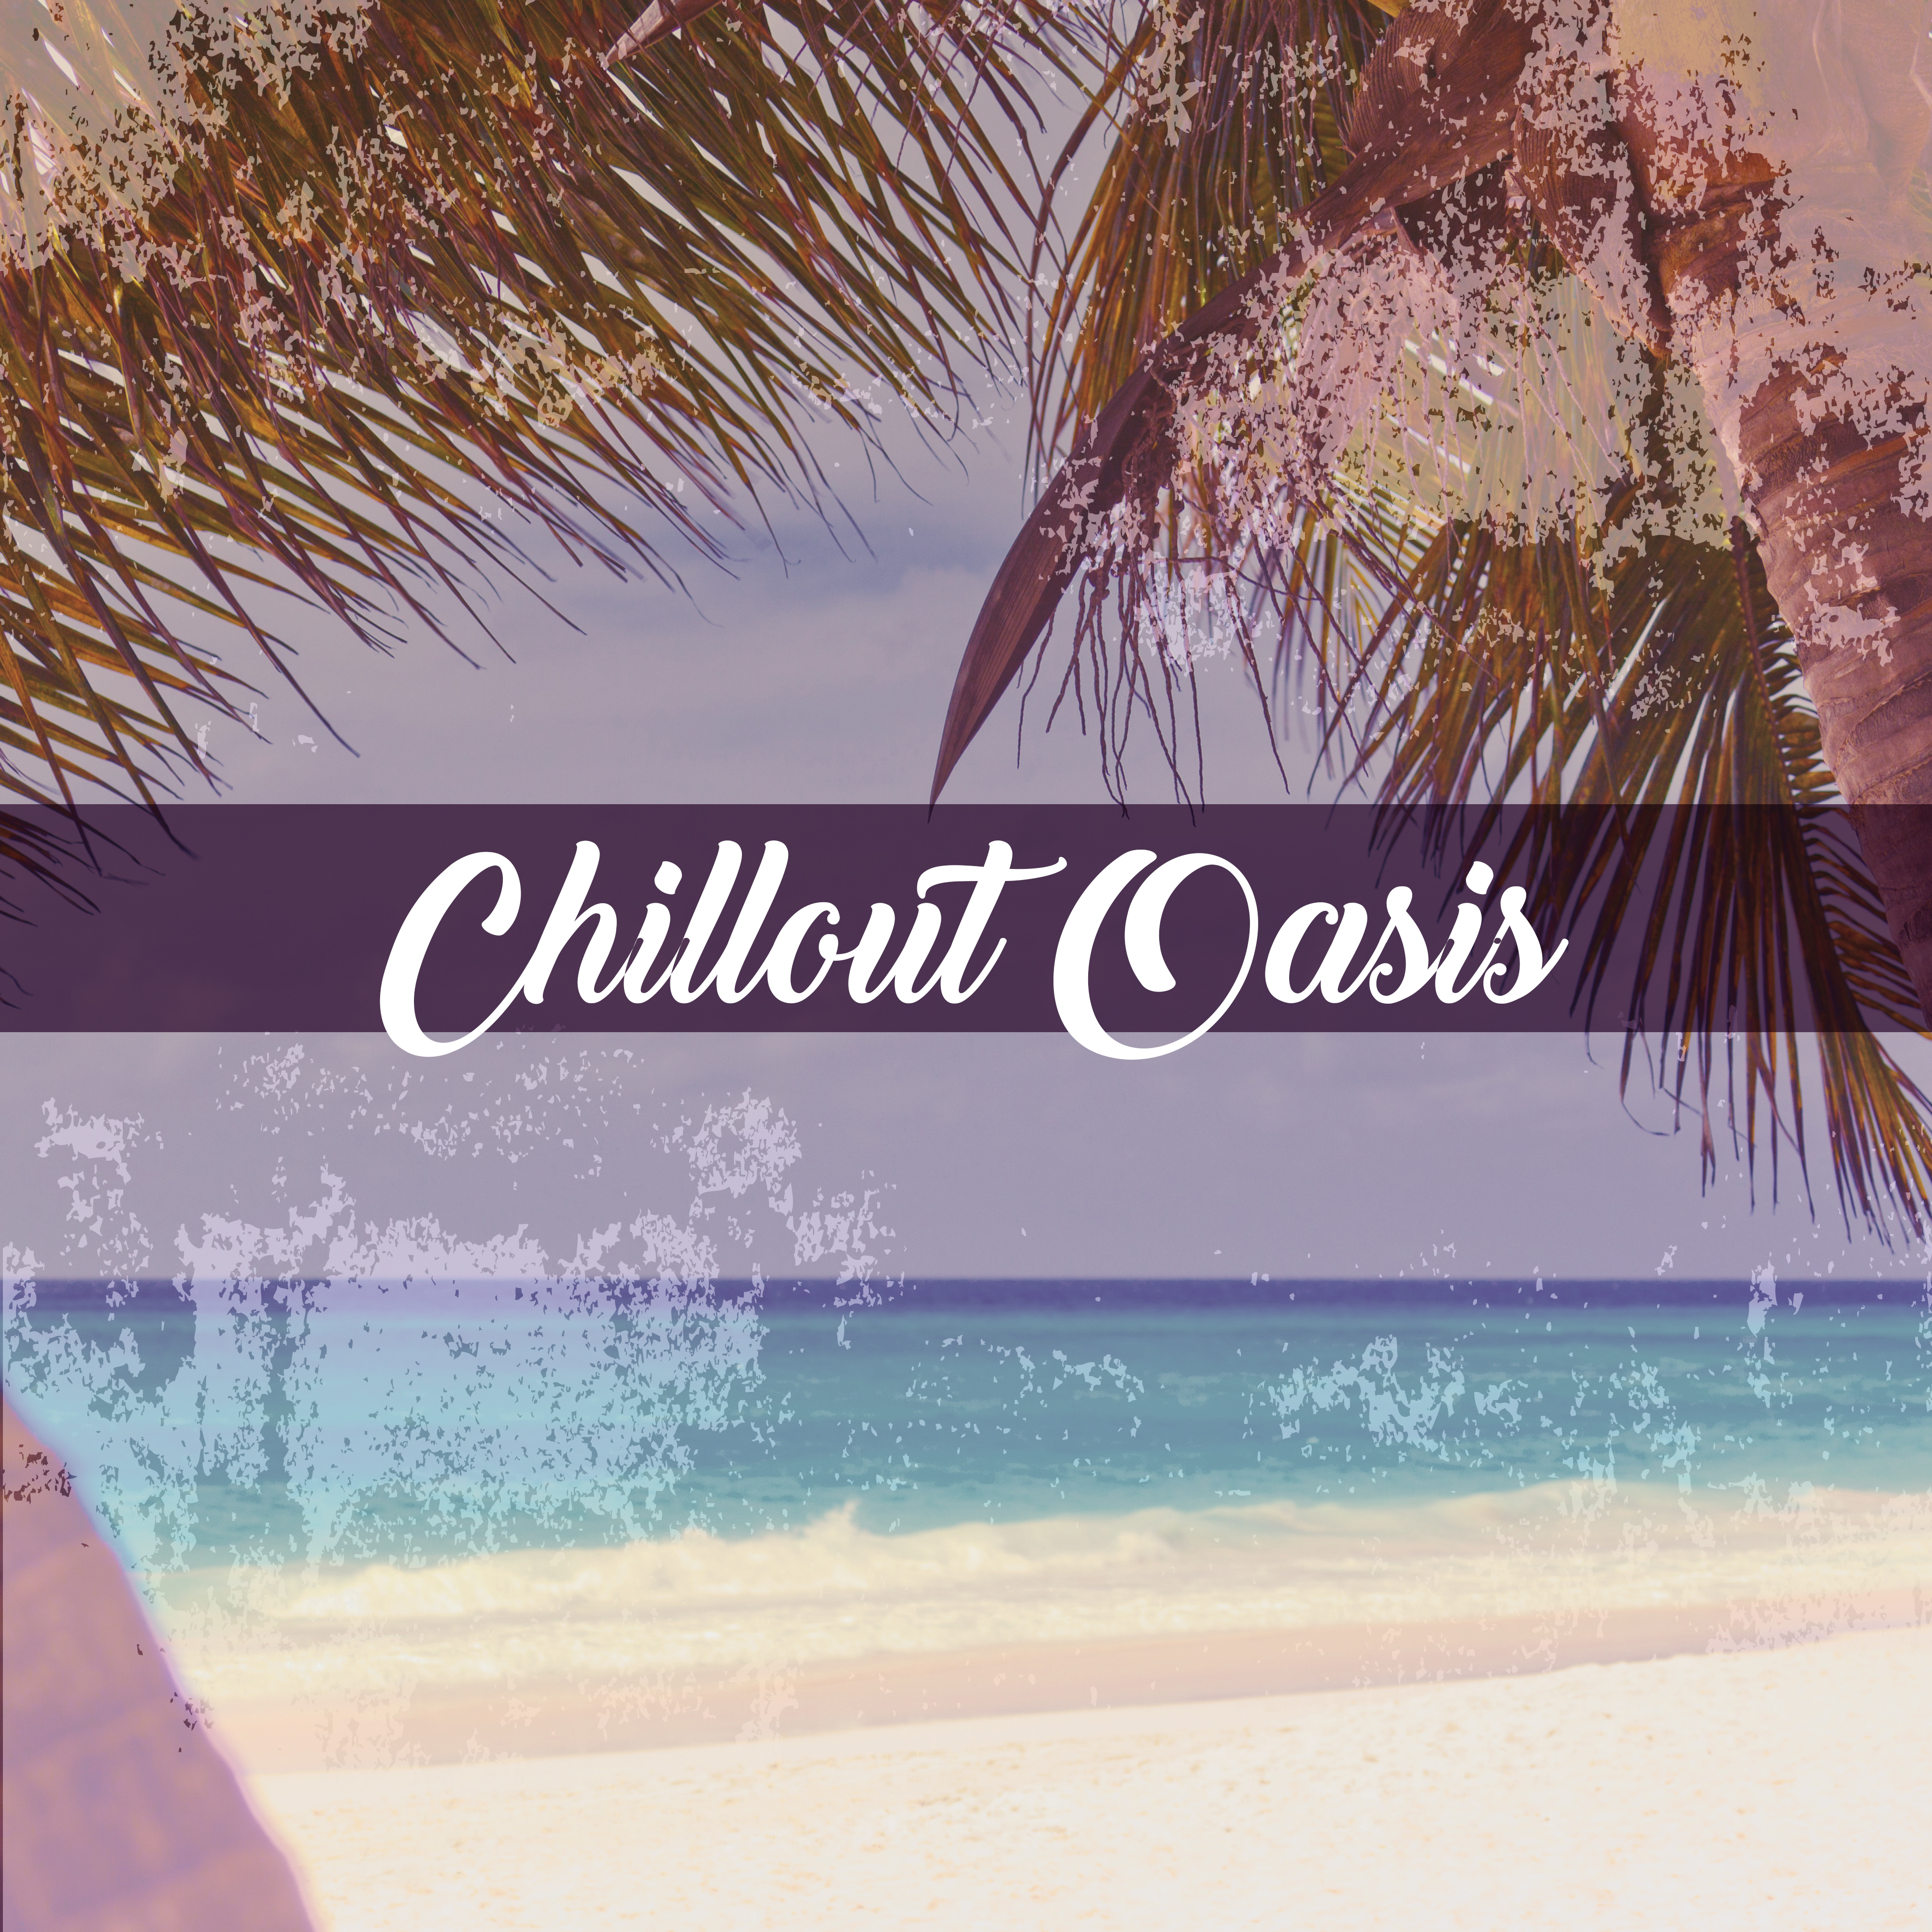 Chillout Oasis  Awesome Fun, Holiday Music, Party Relax, Chillout Ambient Music